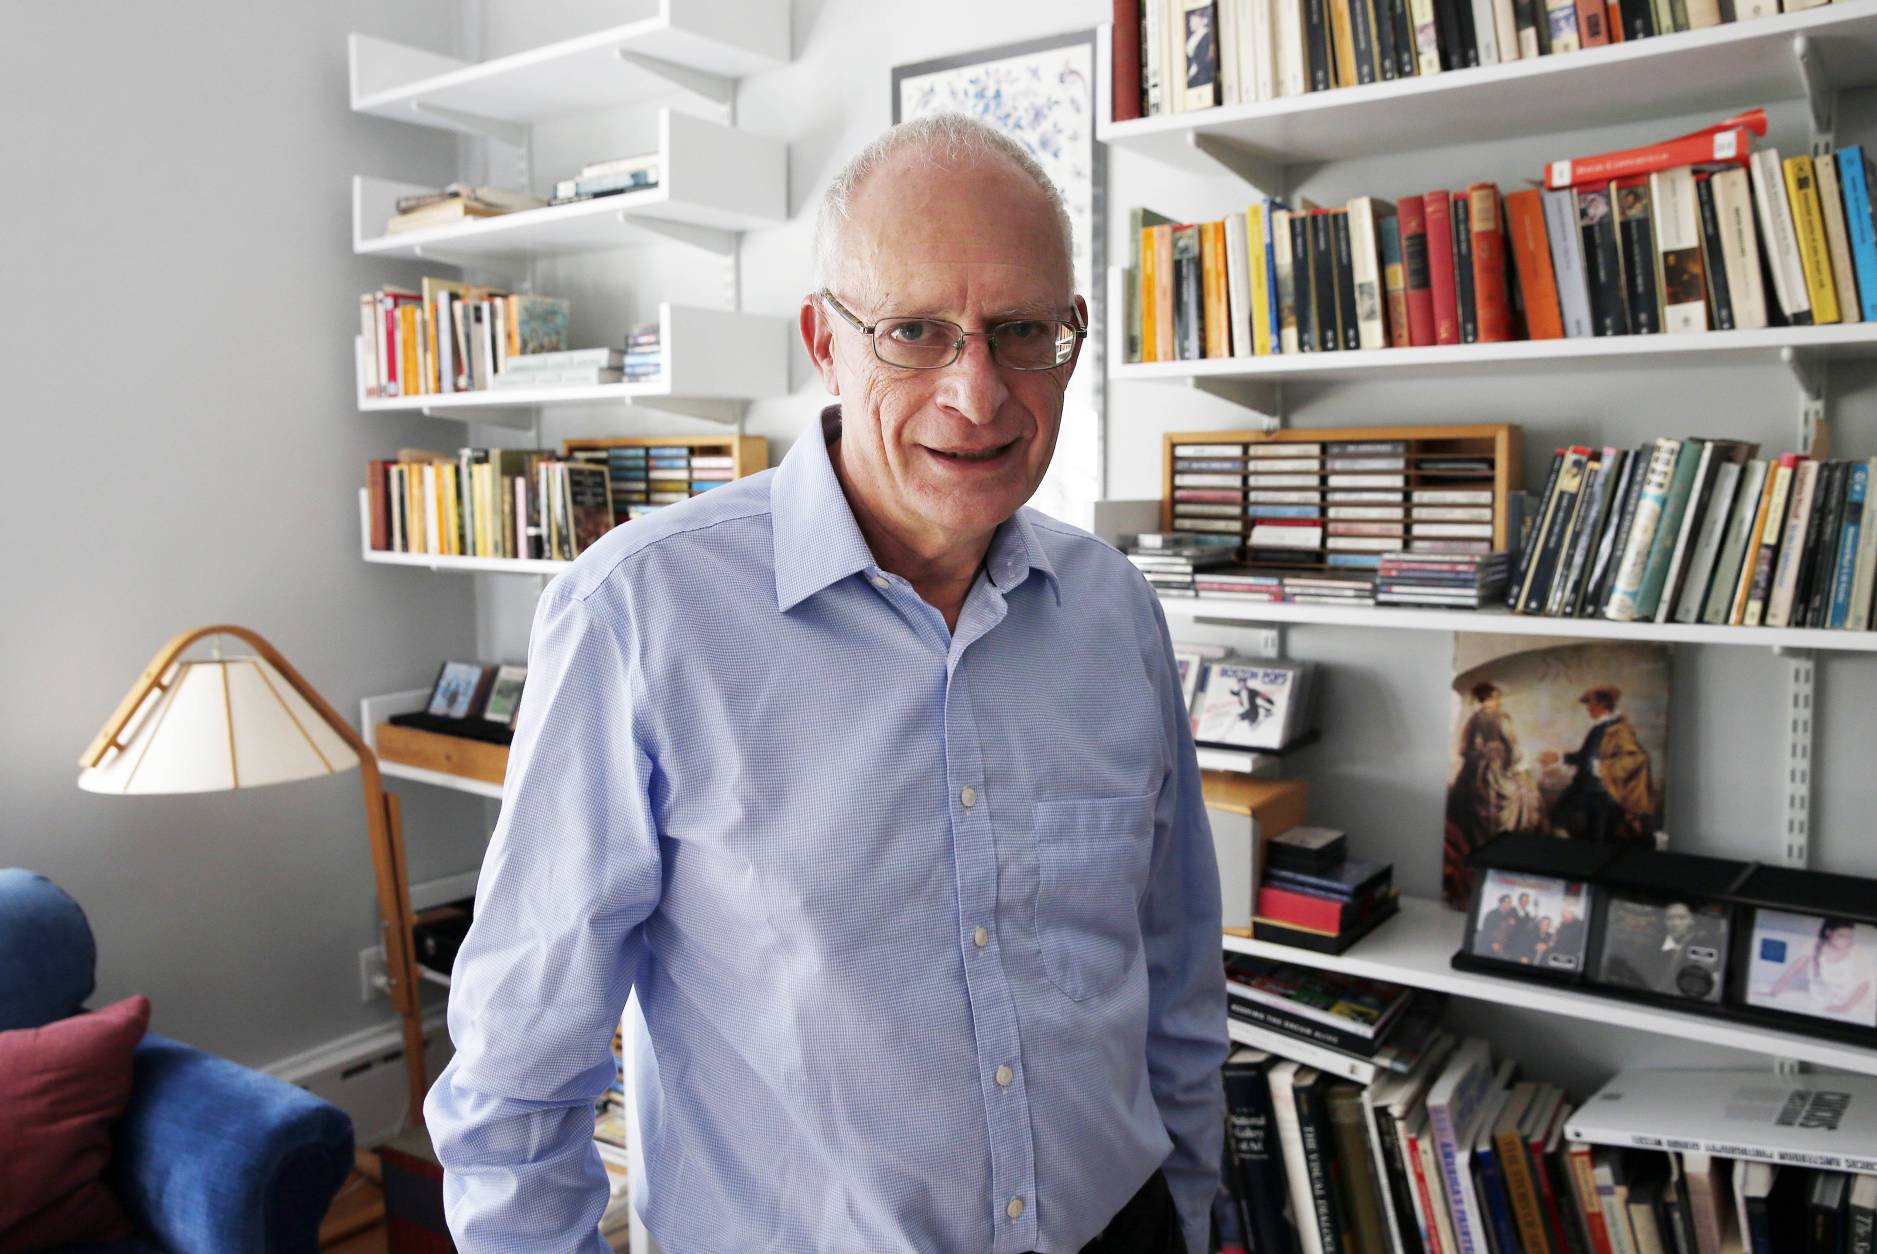 Oliver Hart, the Andrew E. Furer Professor of Economics at Harvard, poses at his home in Lexington, Mass., Monday, Oct. 10, 2016, after winning the Nobel Prize in economics. Hart and Finnish economist Bengt Holmstrom, of the Massachusetts Institute of Technology, share the award for their contributions to contract theory. (AP Photo/Michael Dwyer)